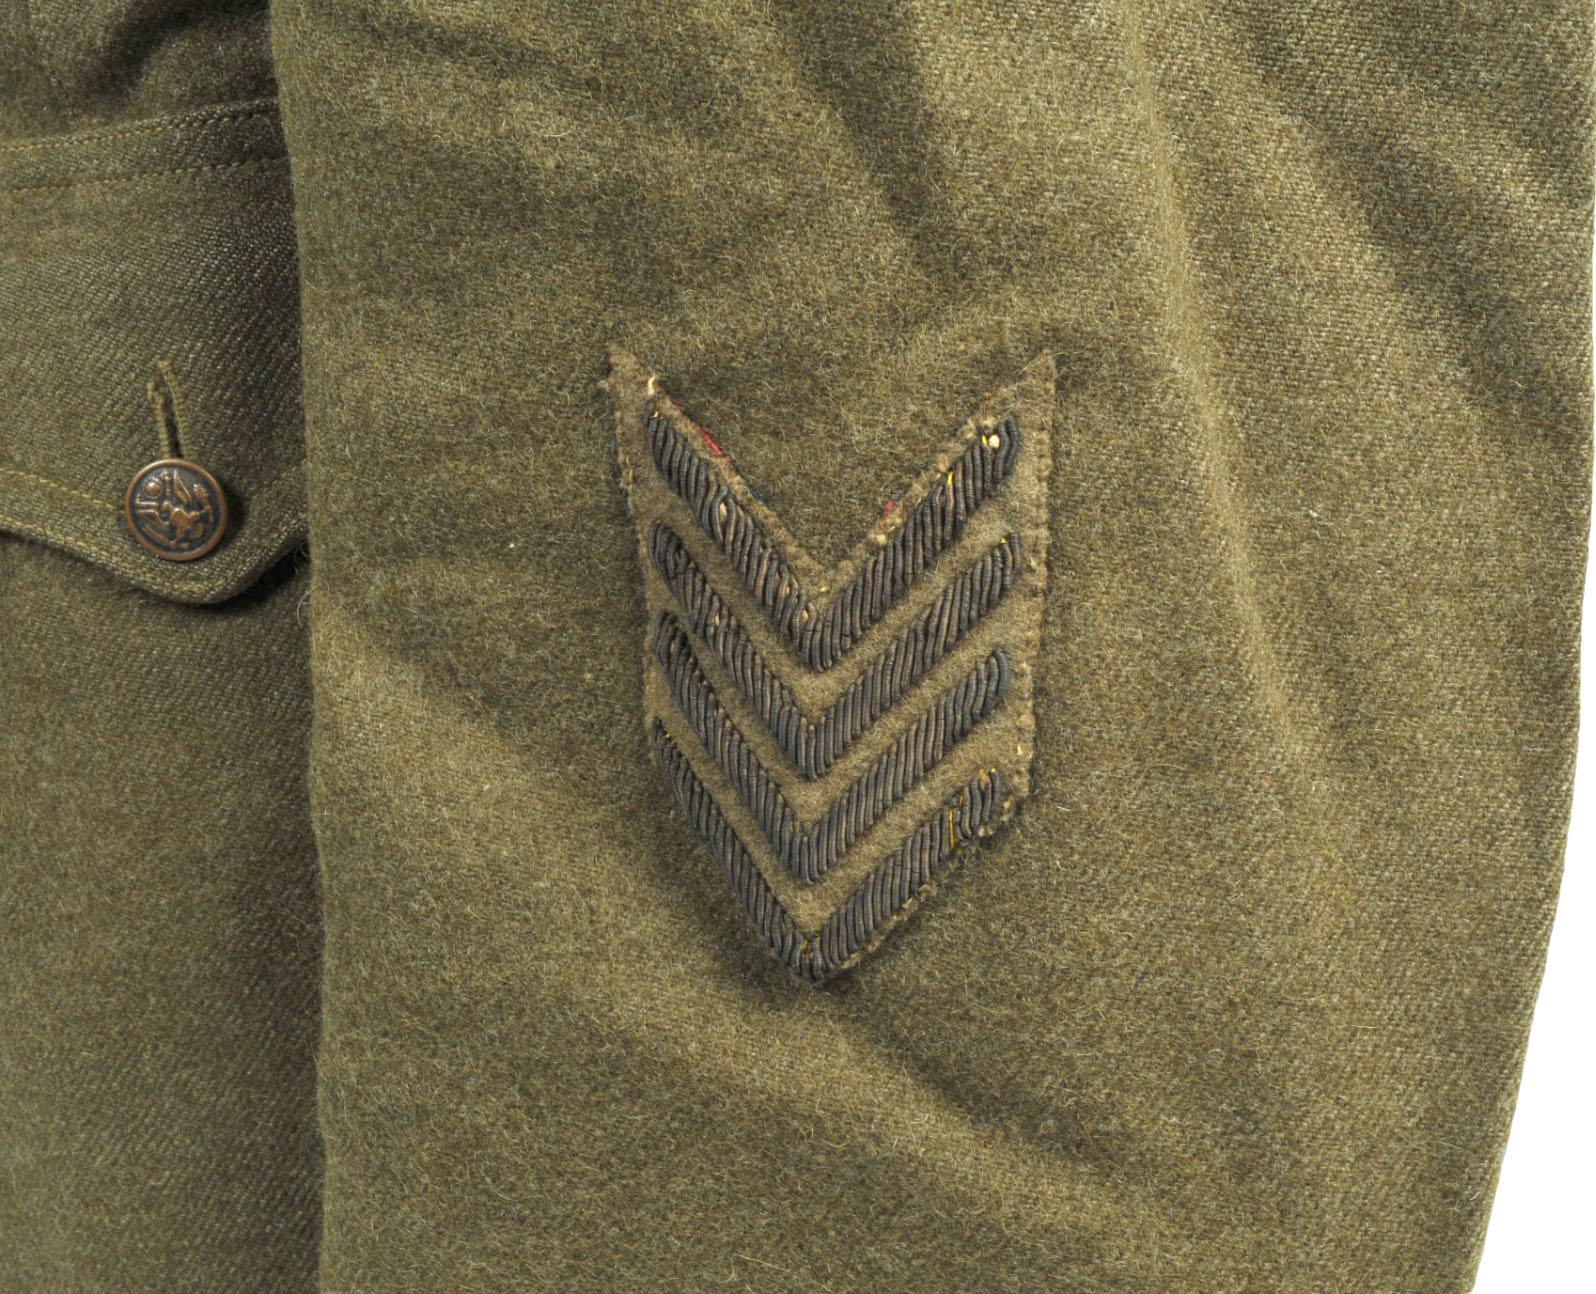 RARE US Army WWI issued 1st Infantry Division Uniform Grouping of an Octagenerian (HRT)